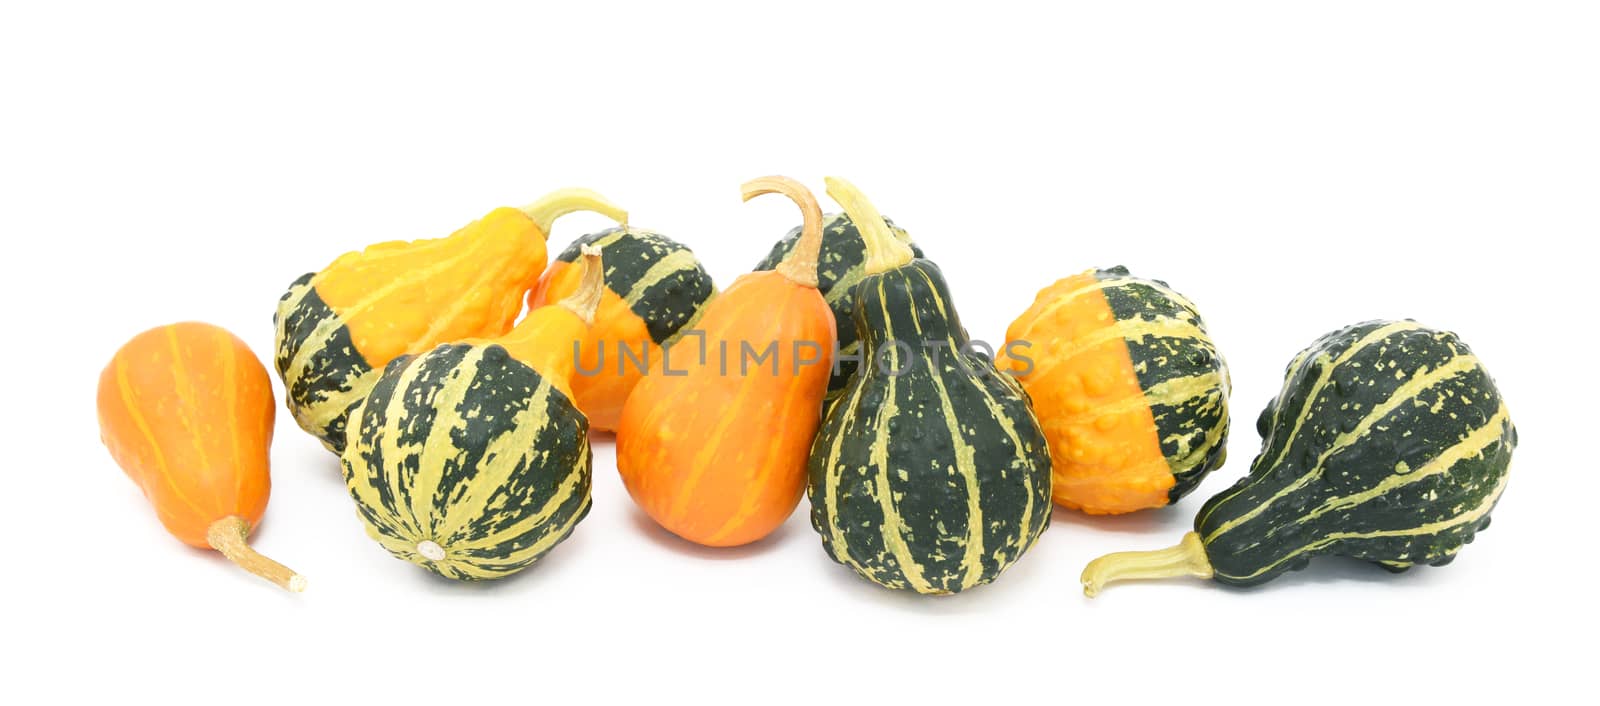 Green, orange and yellow ornamental gourds by sarahdoow